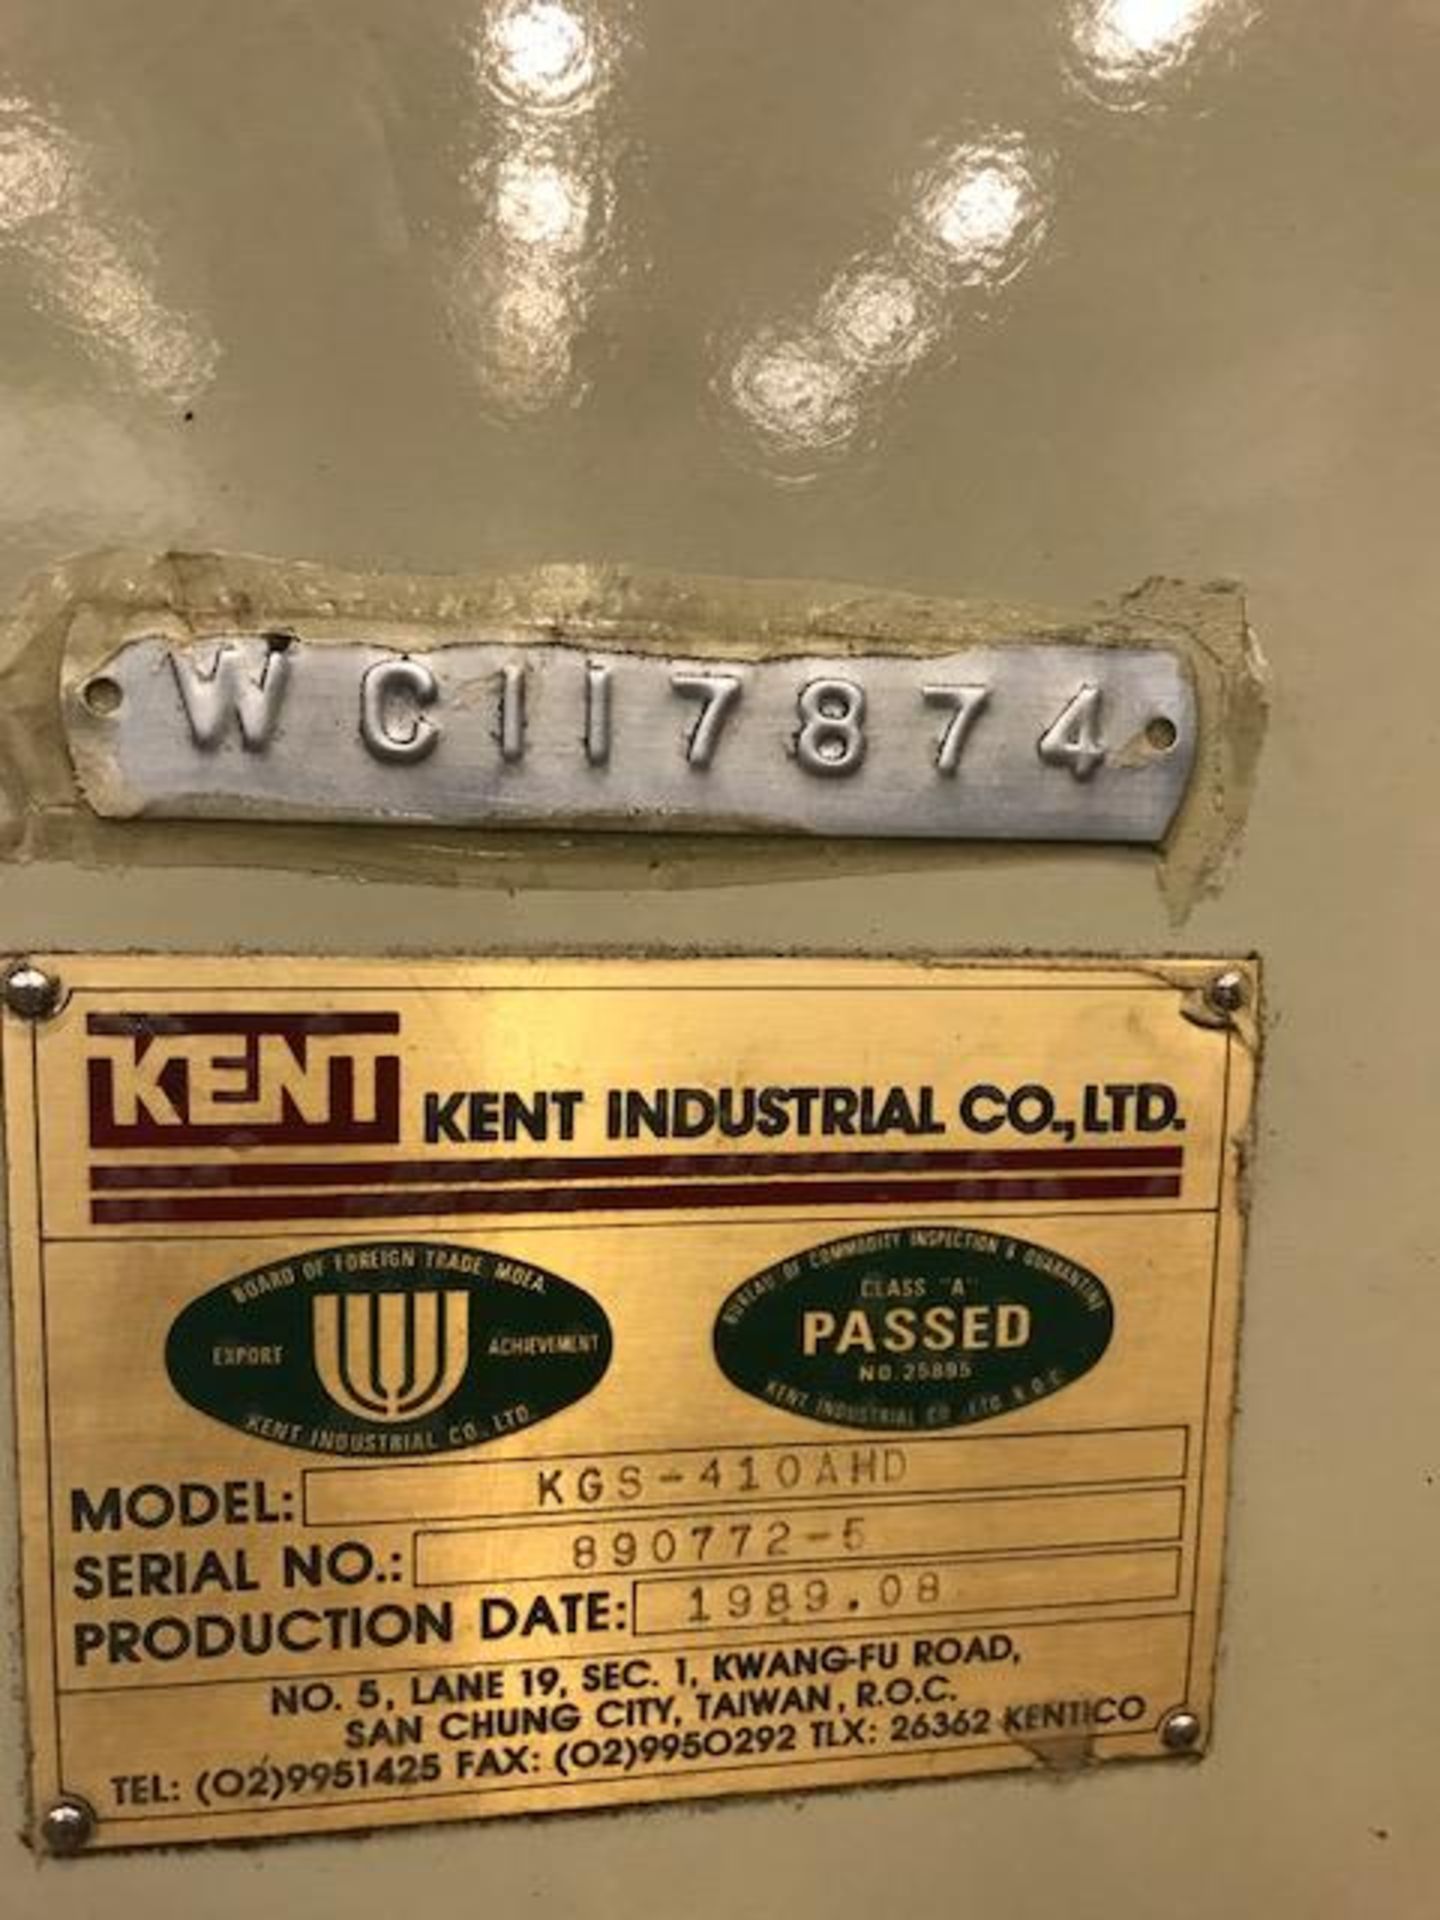 (Located In Murfreesboro TN) Kent Industrial Surface Grinder Model KGS-410AHD S/N 890772-6 Rigging F - Image 2 of 2